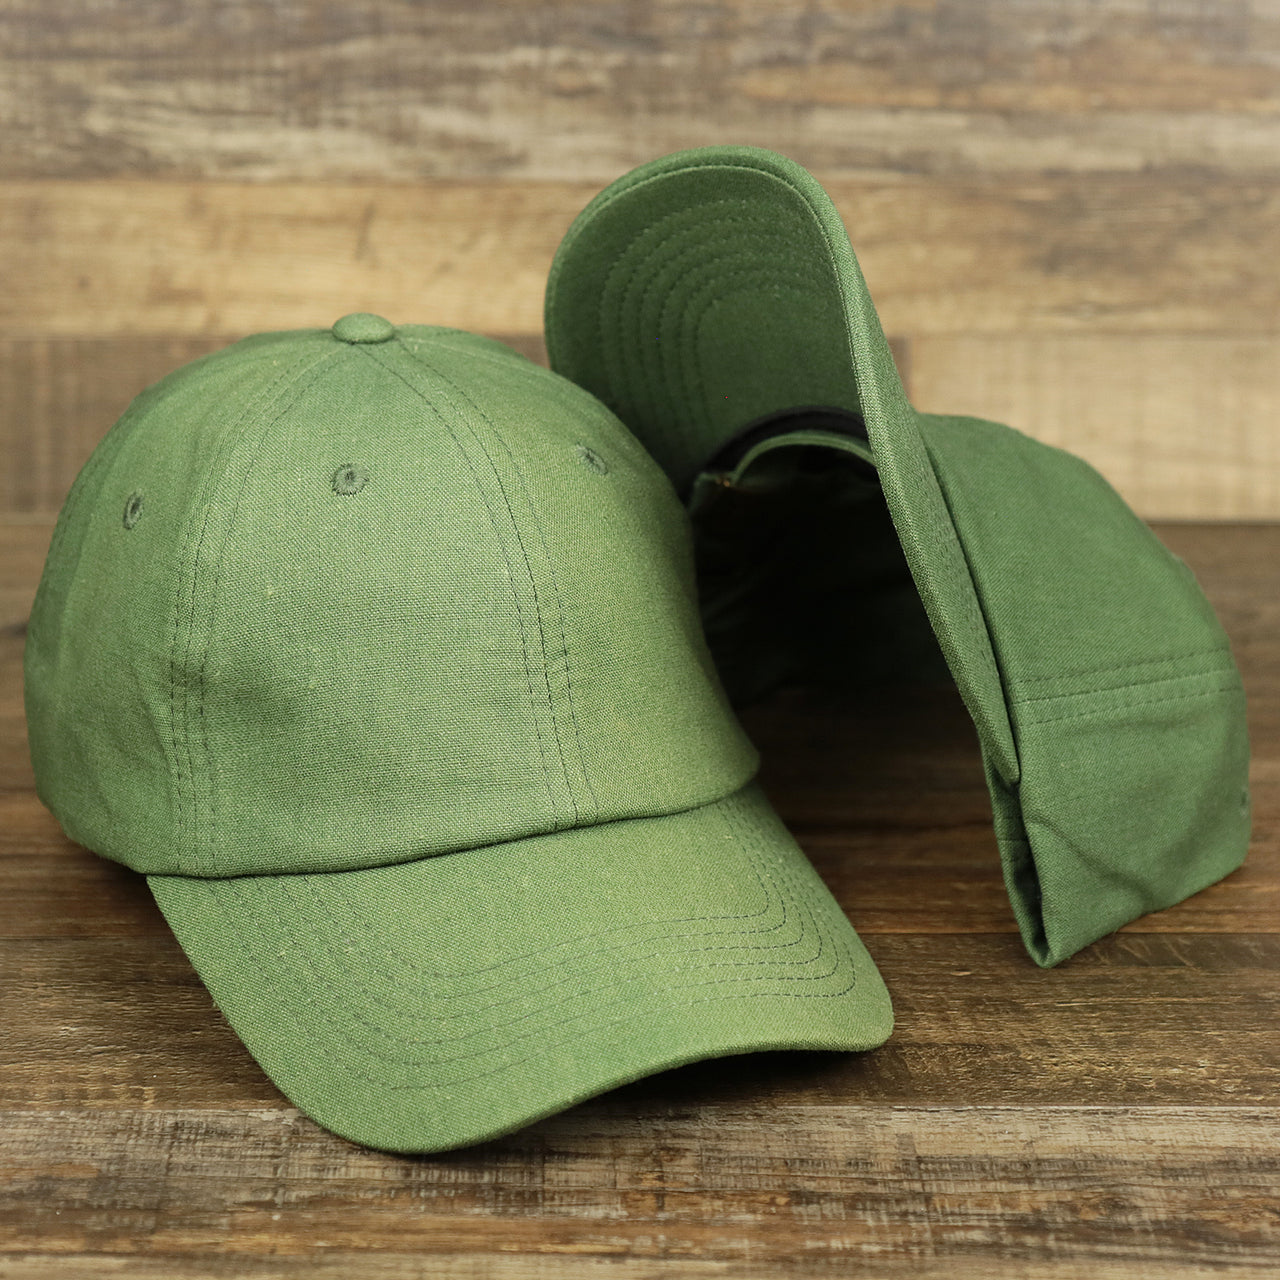 FOOT CLAN | DAD HAT | LINEN MATERIAL BLANK OSFM COTTON UNSTRUCTURED ADJUSTABLE, LODI GREEN, OSFM